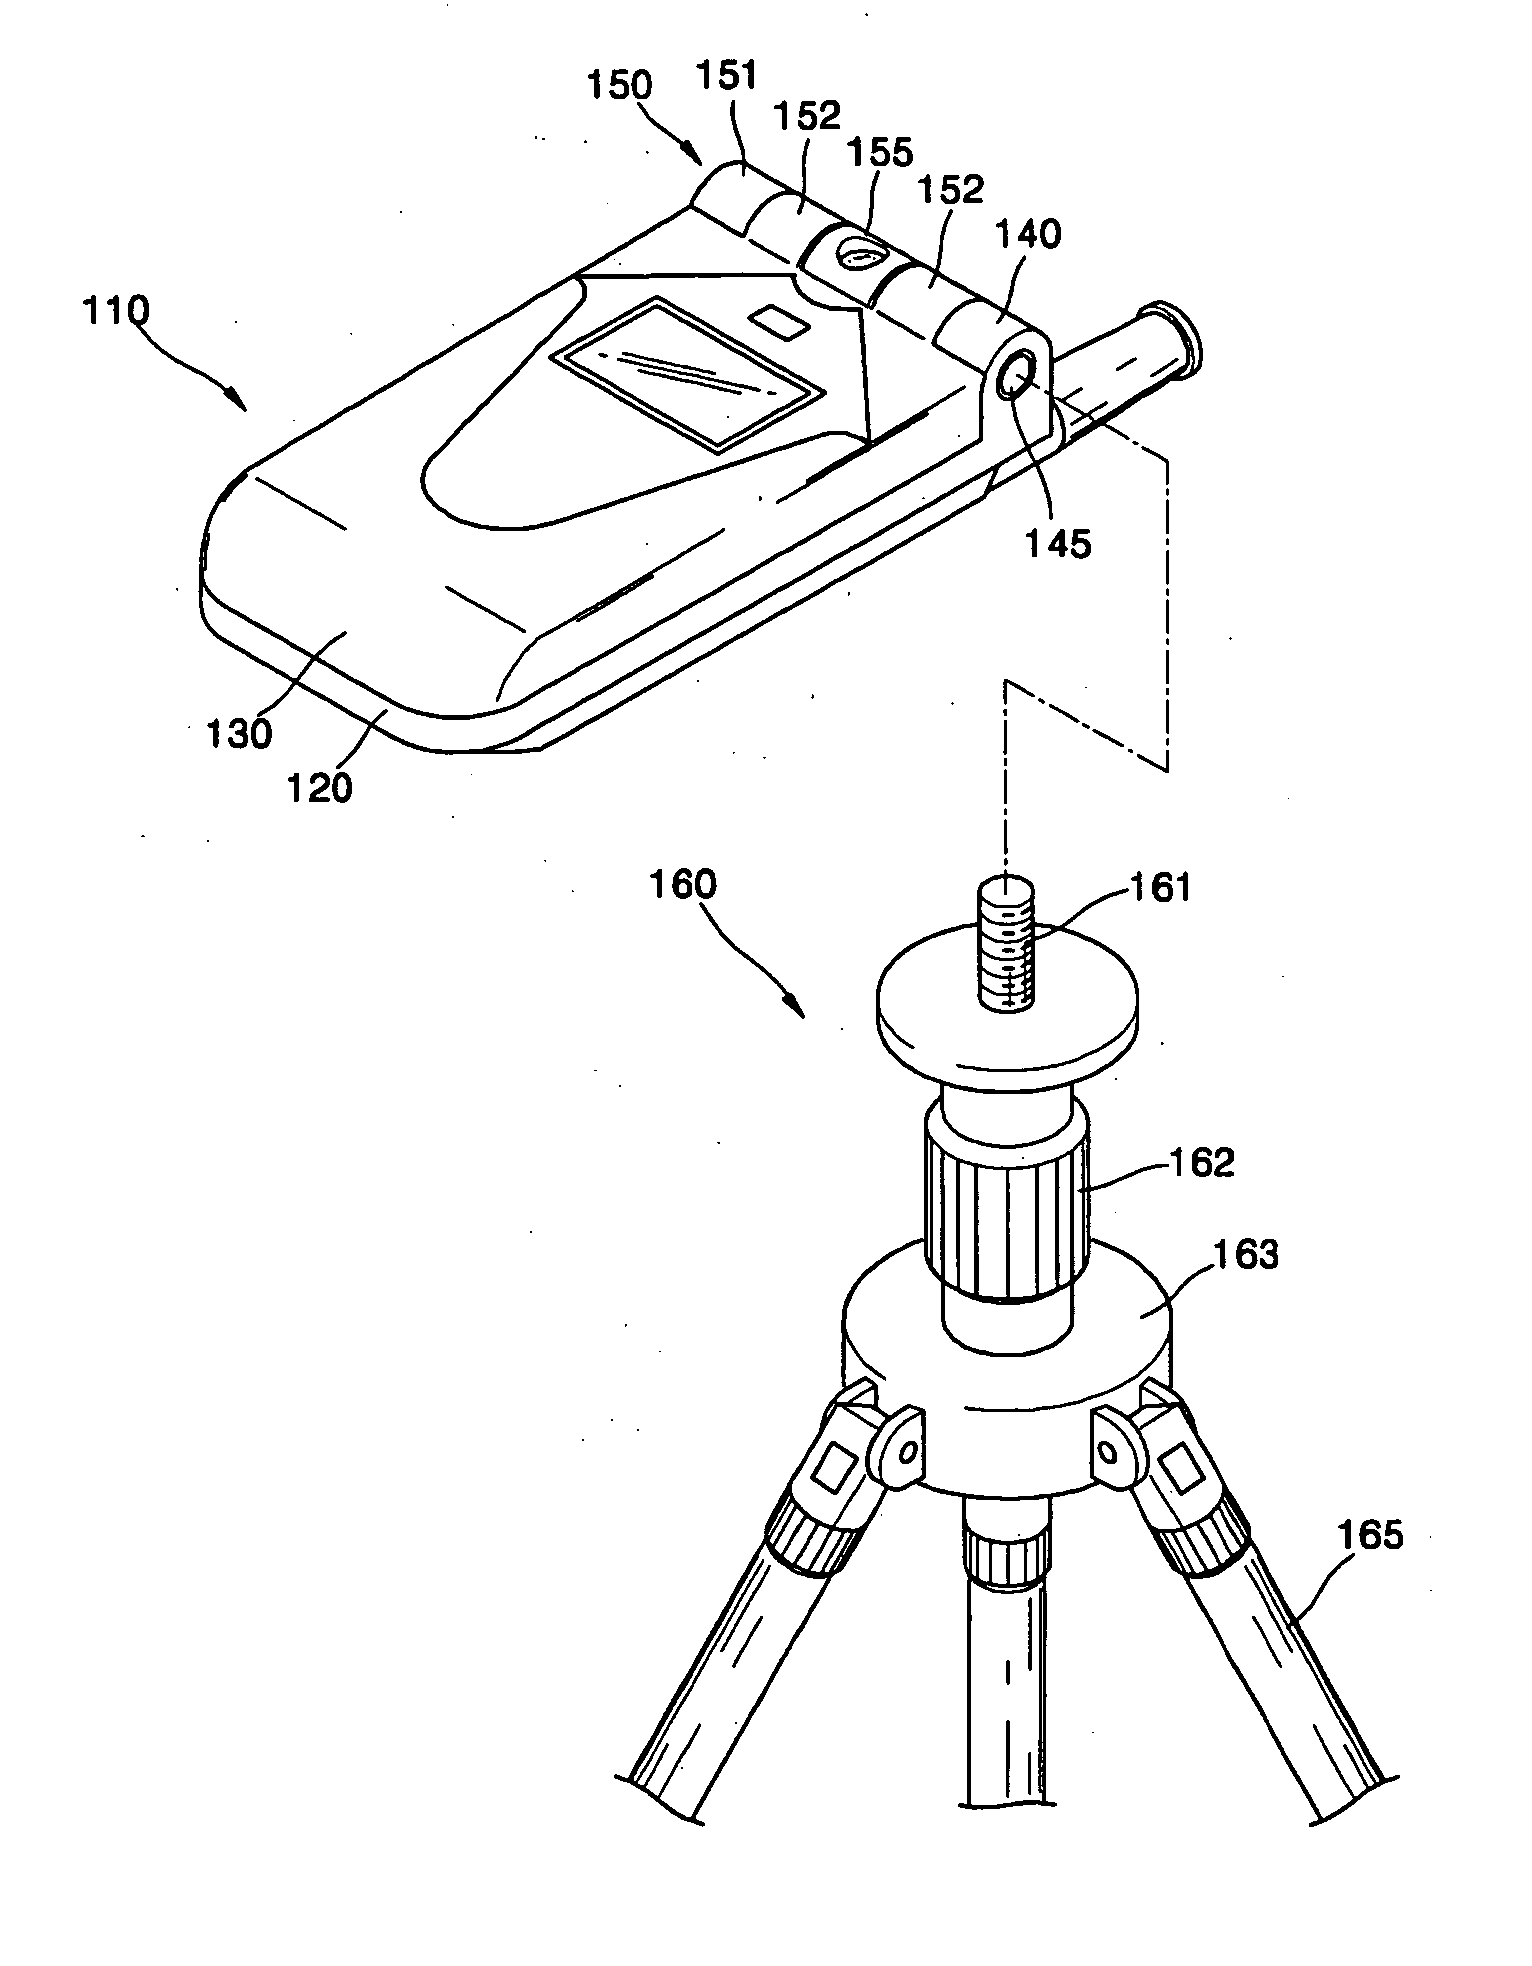 Imaging device having stand connection